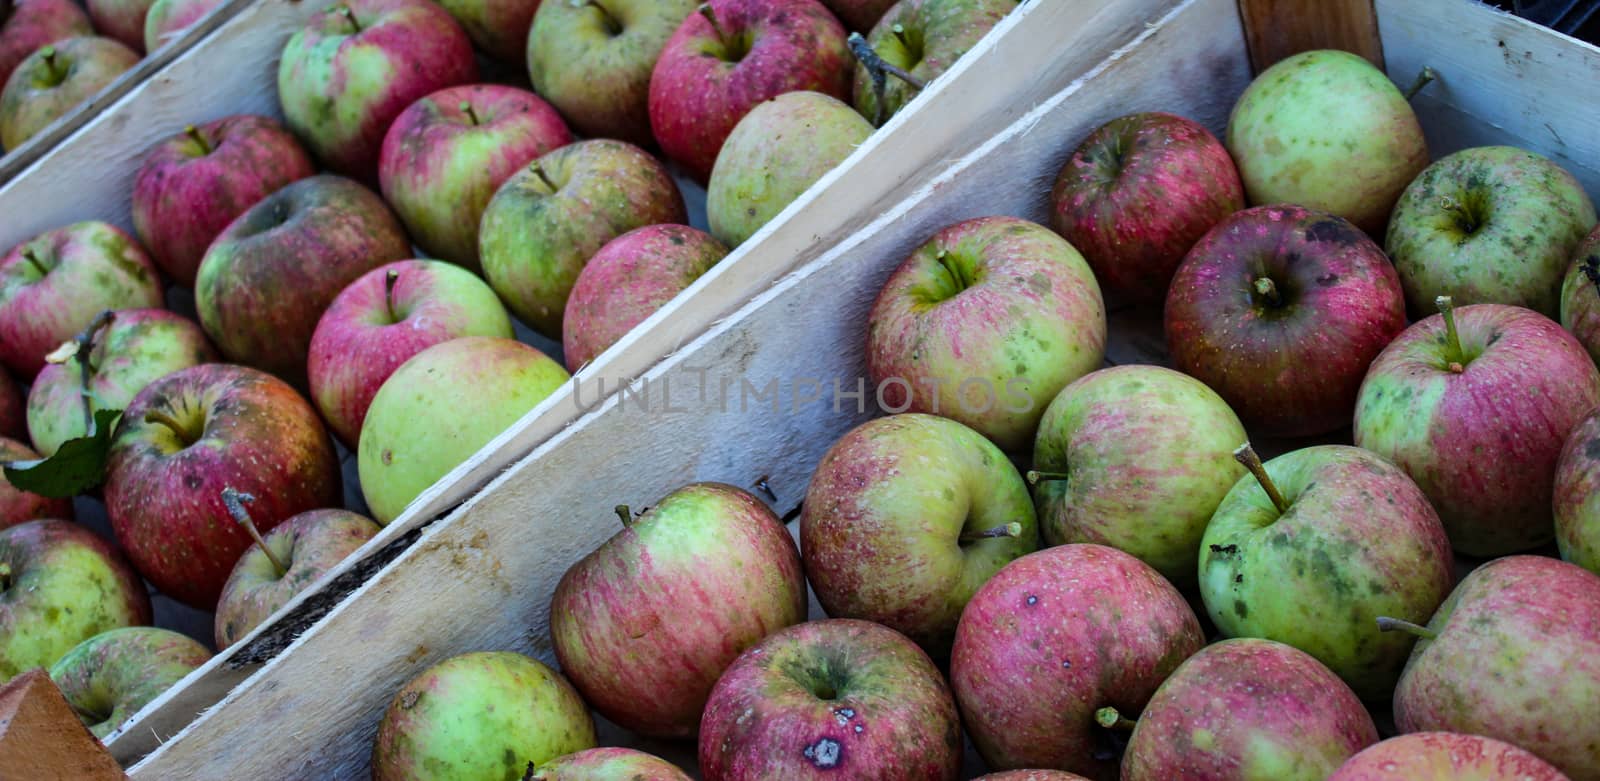 Banner. Picked apples in wooden crates ready for sale. Organic apples. Zavidovici, Bosnia and Herzegovina.